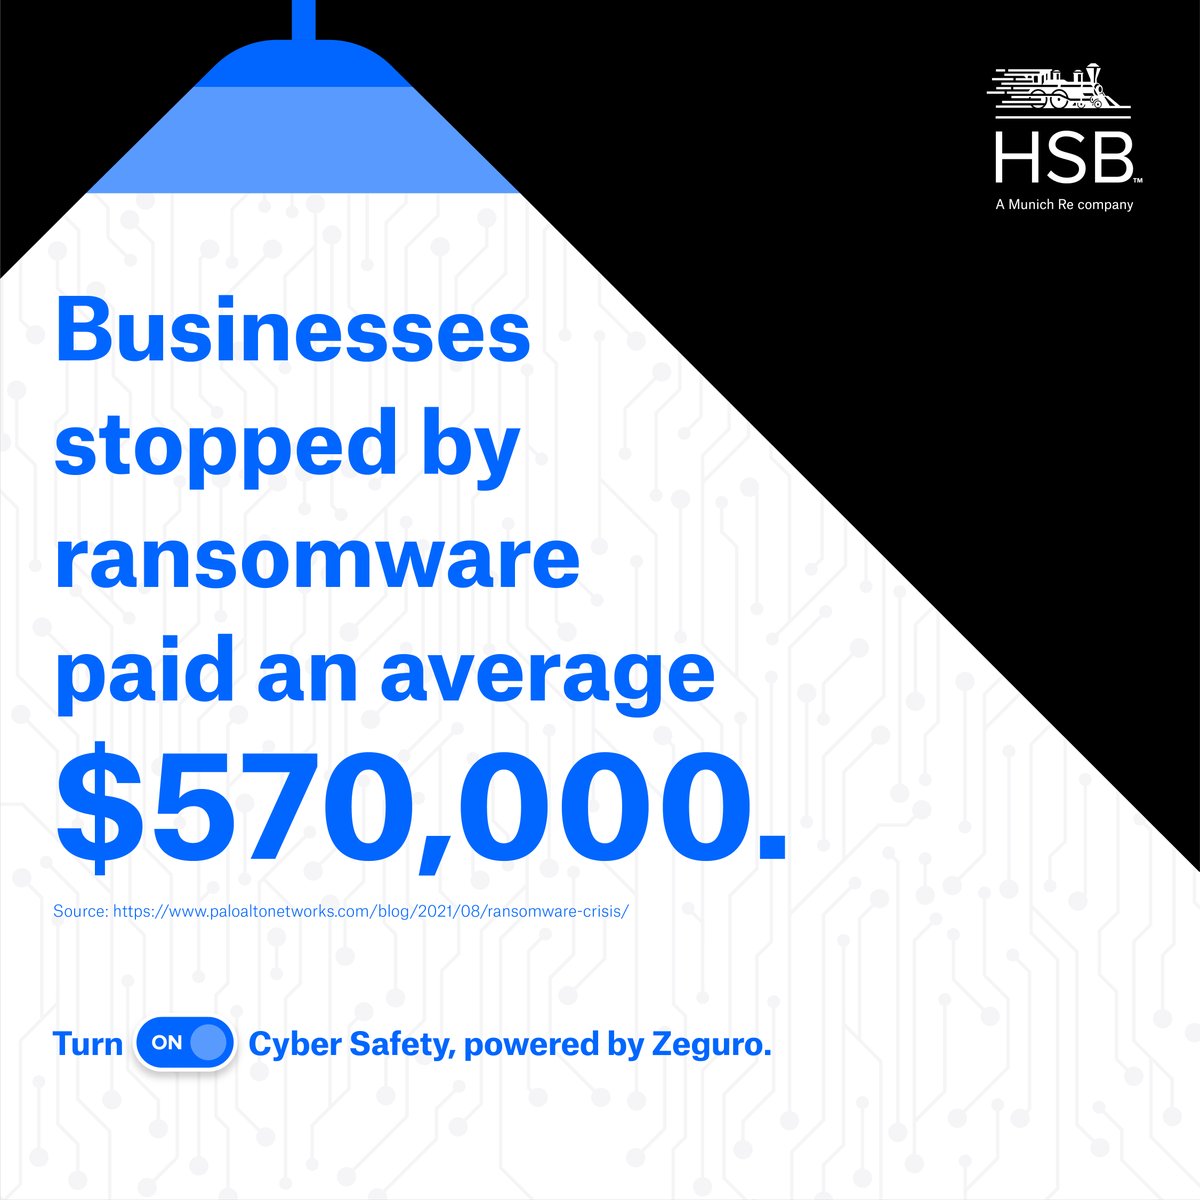 Cybercrime is everywhere, and it’s hitting small businesses hard. HSB provides helpful services and tools, like Cyber Safety powered by Zeguro, to help you dodge the cybercrime bullet. Stay protected this #CybersecurityAwarenessMonth and learn more here: munichre.com/hsb/en/product…